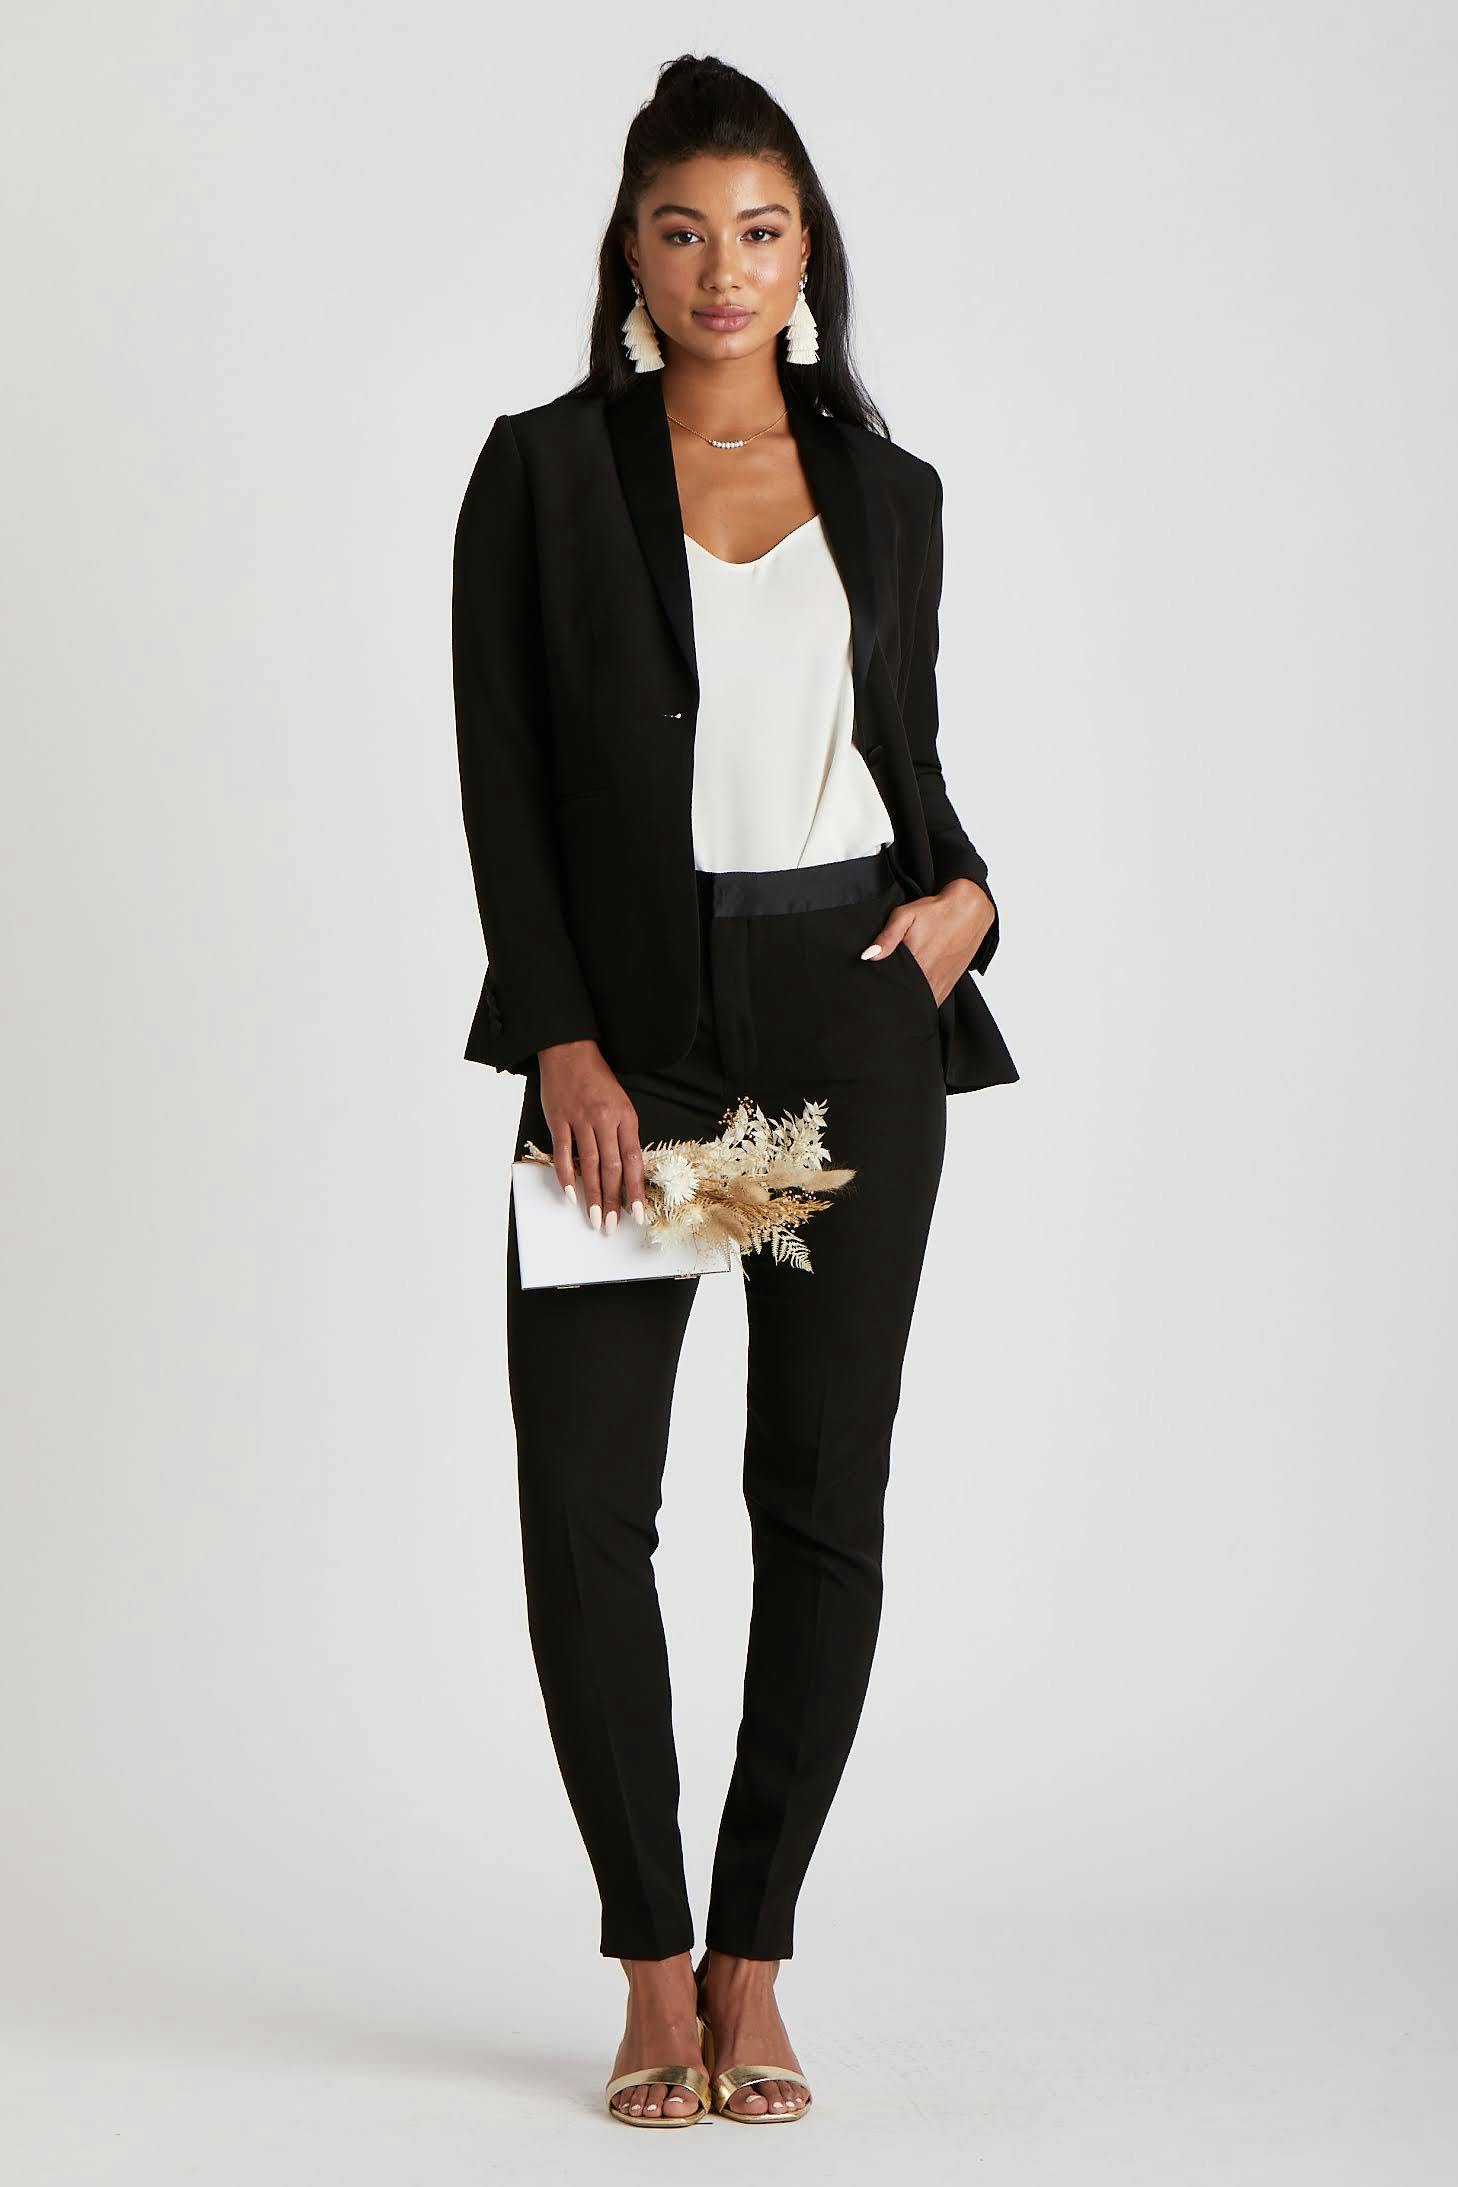 How To Wear Pants To A Wedding With Confidence  Dressy pants outfits, Black  pants outfit dressy, Wedding guest pants